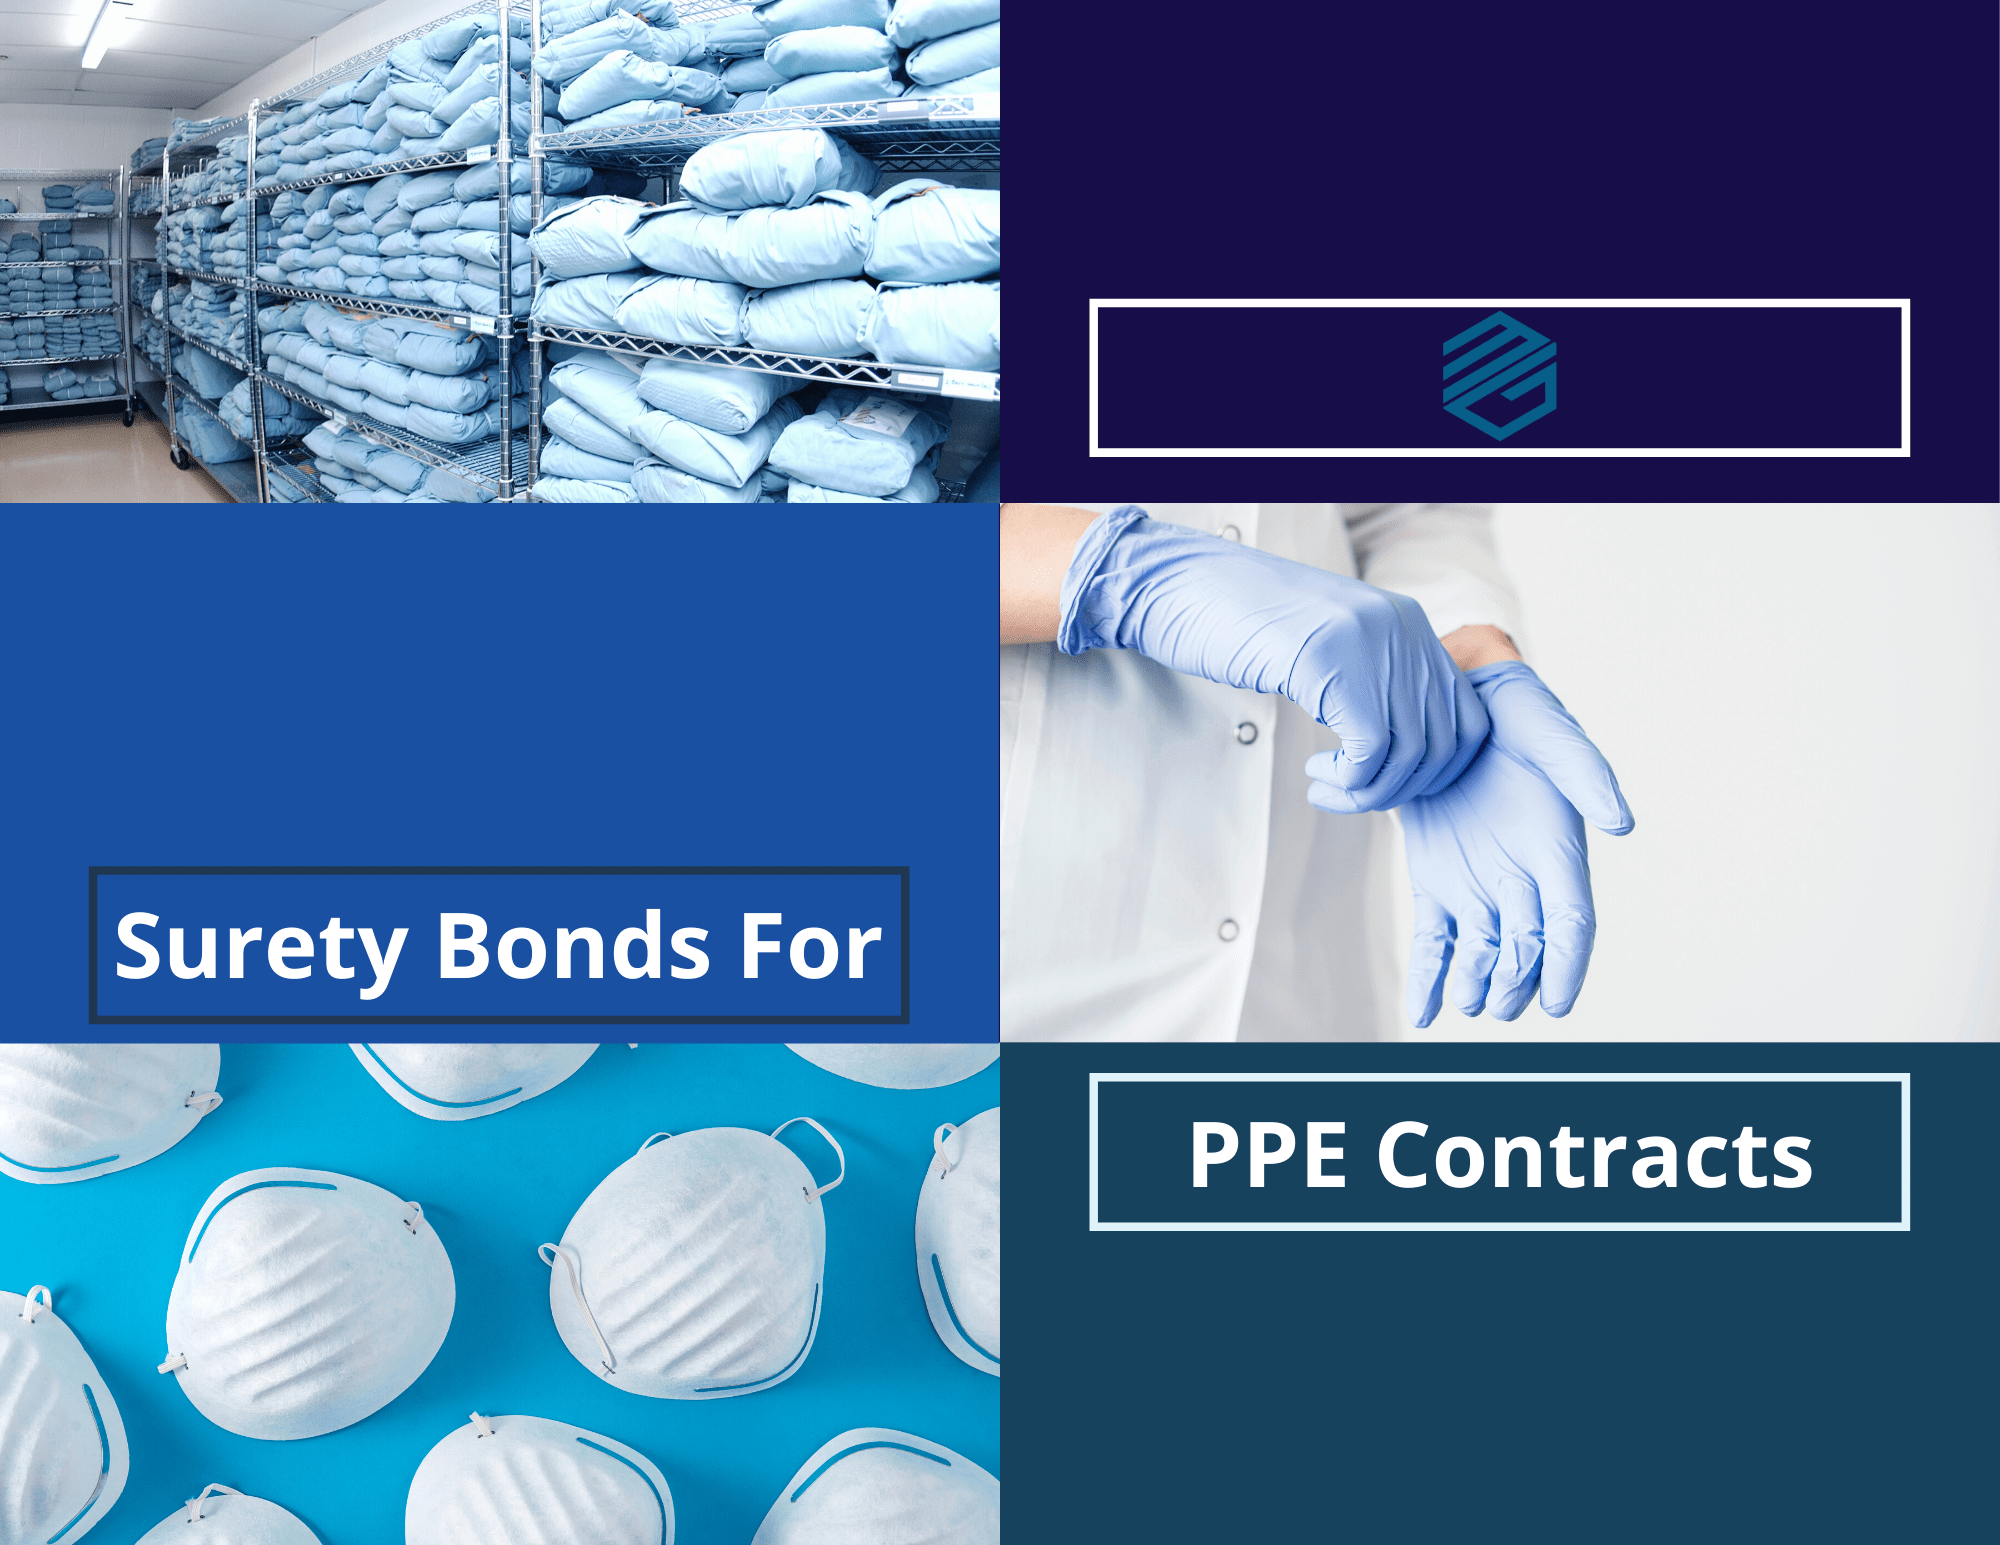 Surety Bonds for PPE Contracts - a picture of medical masks, a picture with medical gowns and a picture with latex gloves surrounded by three blue boxes. The words Surety Bonds for PPE Contracts in white.